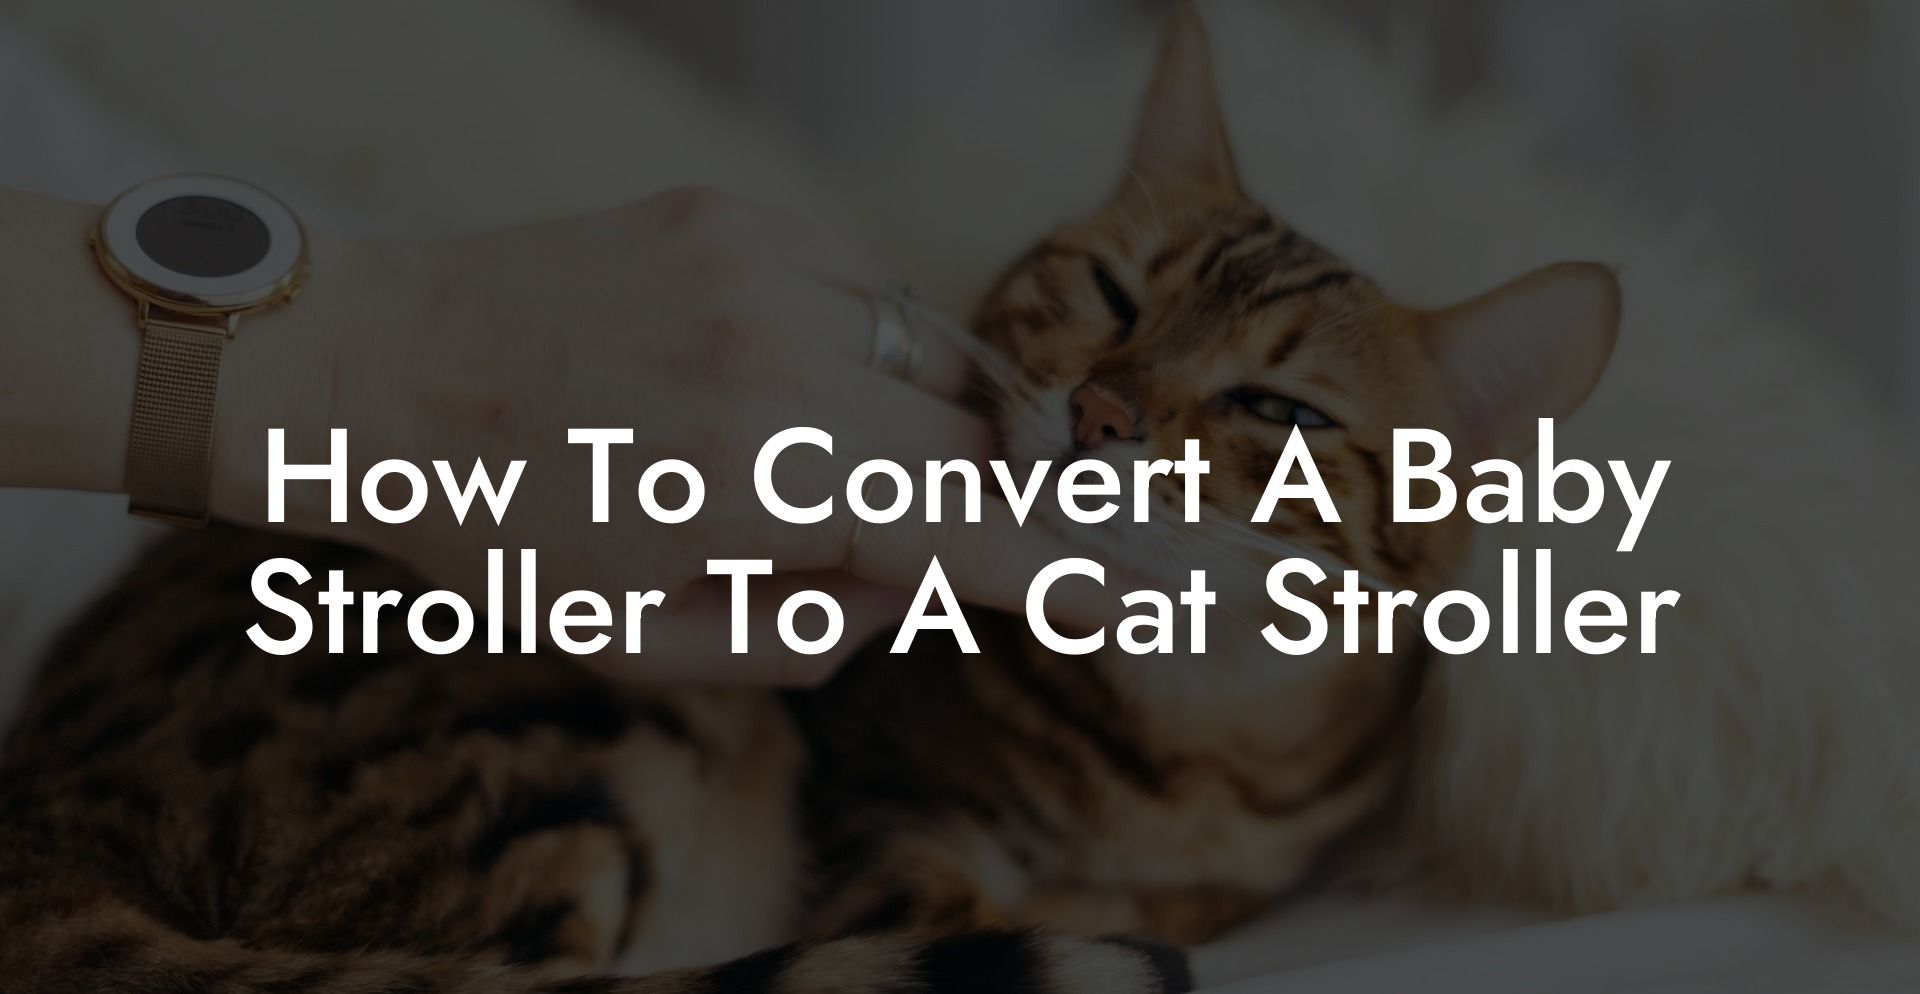 How To Convert A Baby Stroller To A Cat Stroller